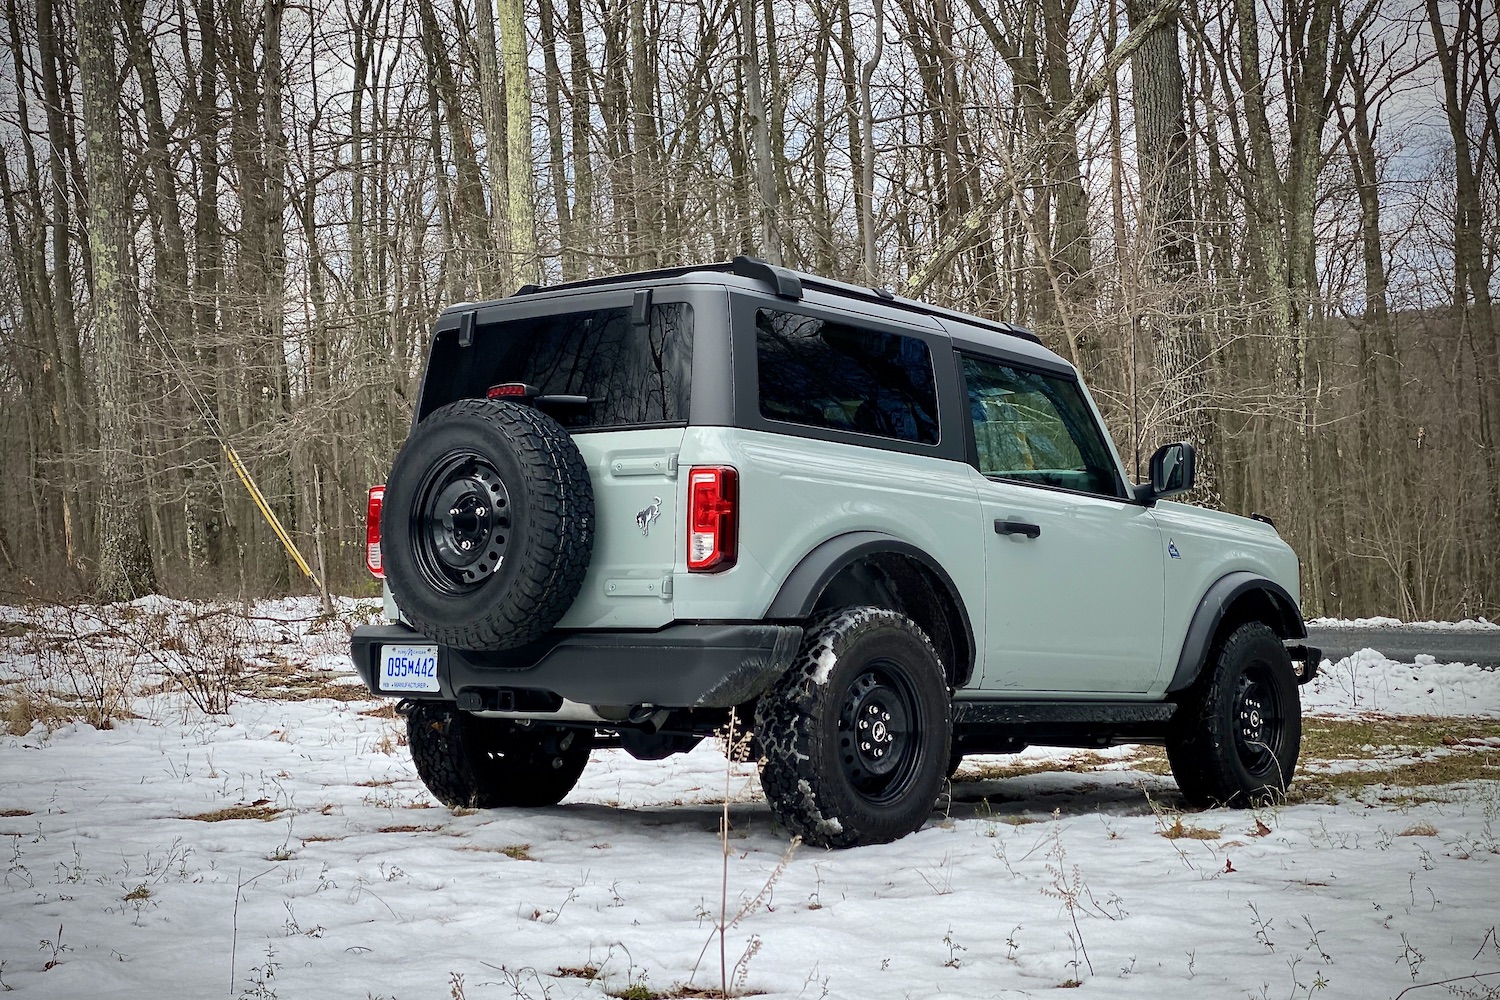 Rear end angle of 2021 Ford Bronco from passenger side in a snowy field with trees in the back.